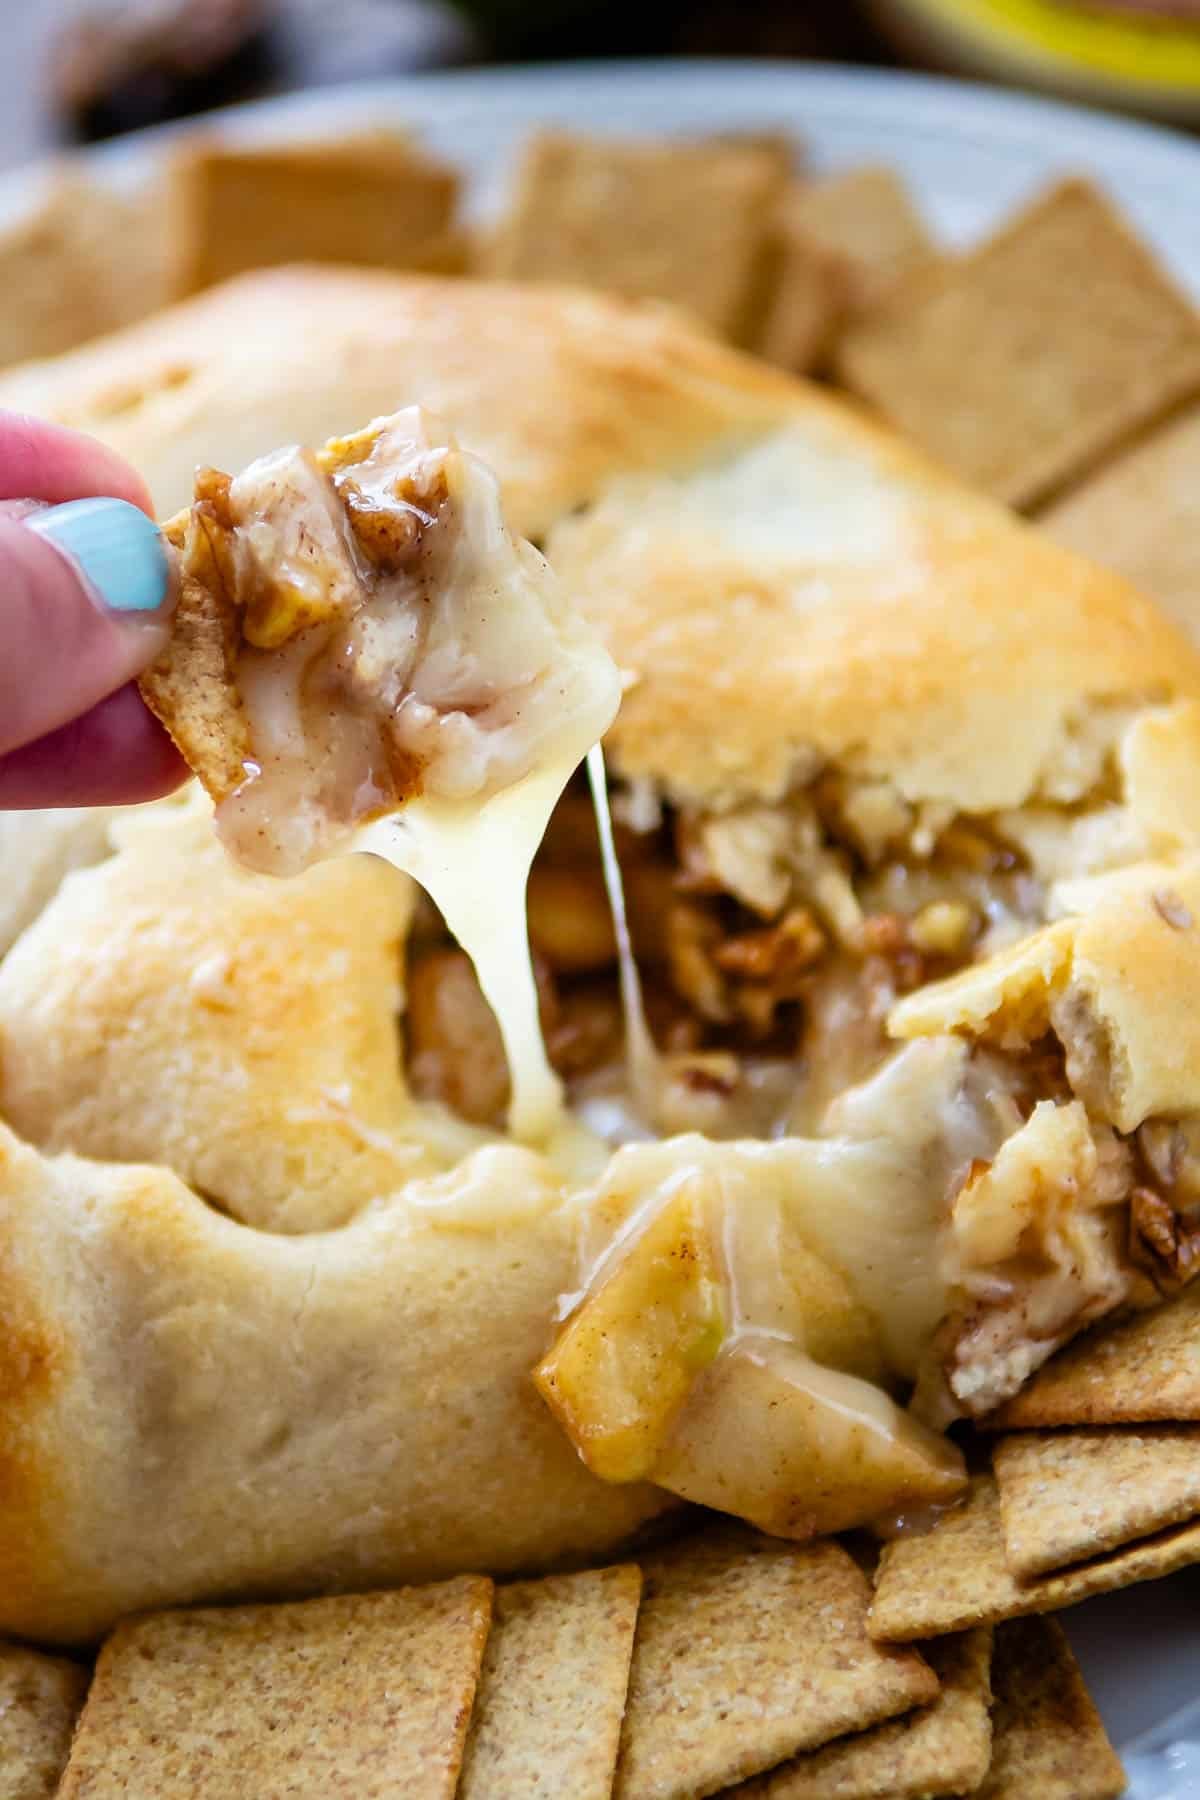 Easy Baked Brie With Pecans Recipe (With Video)